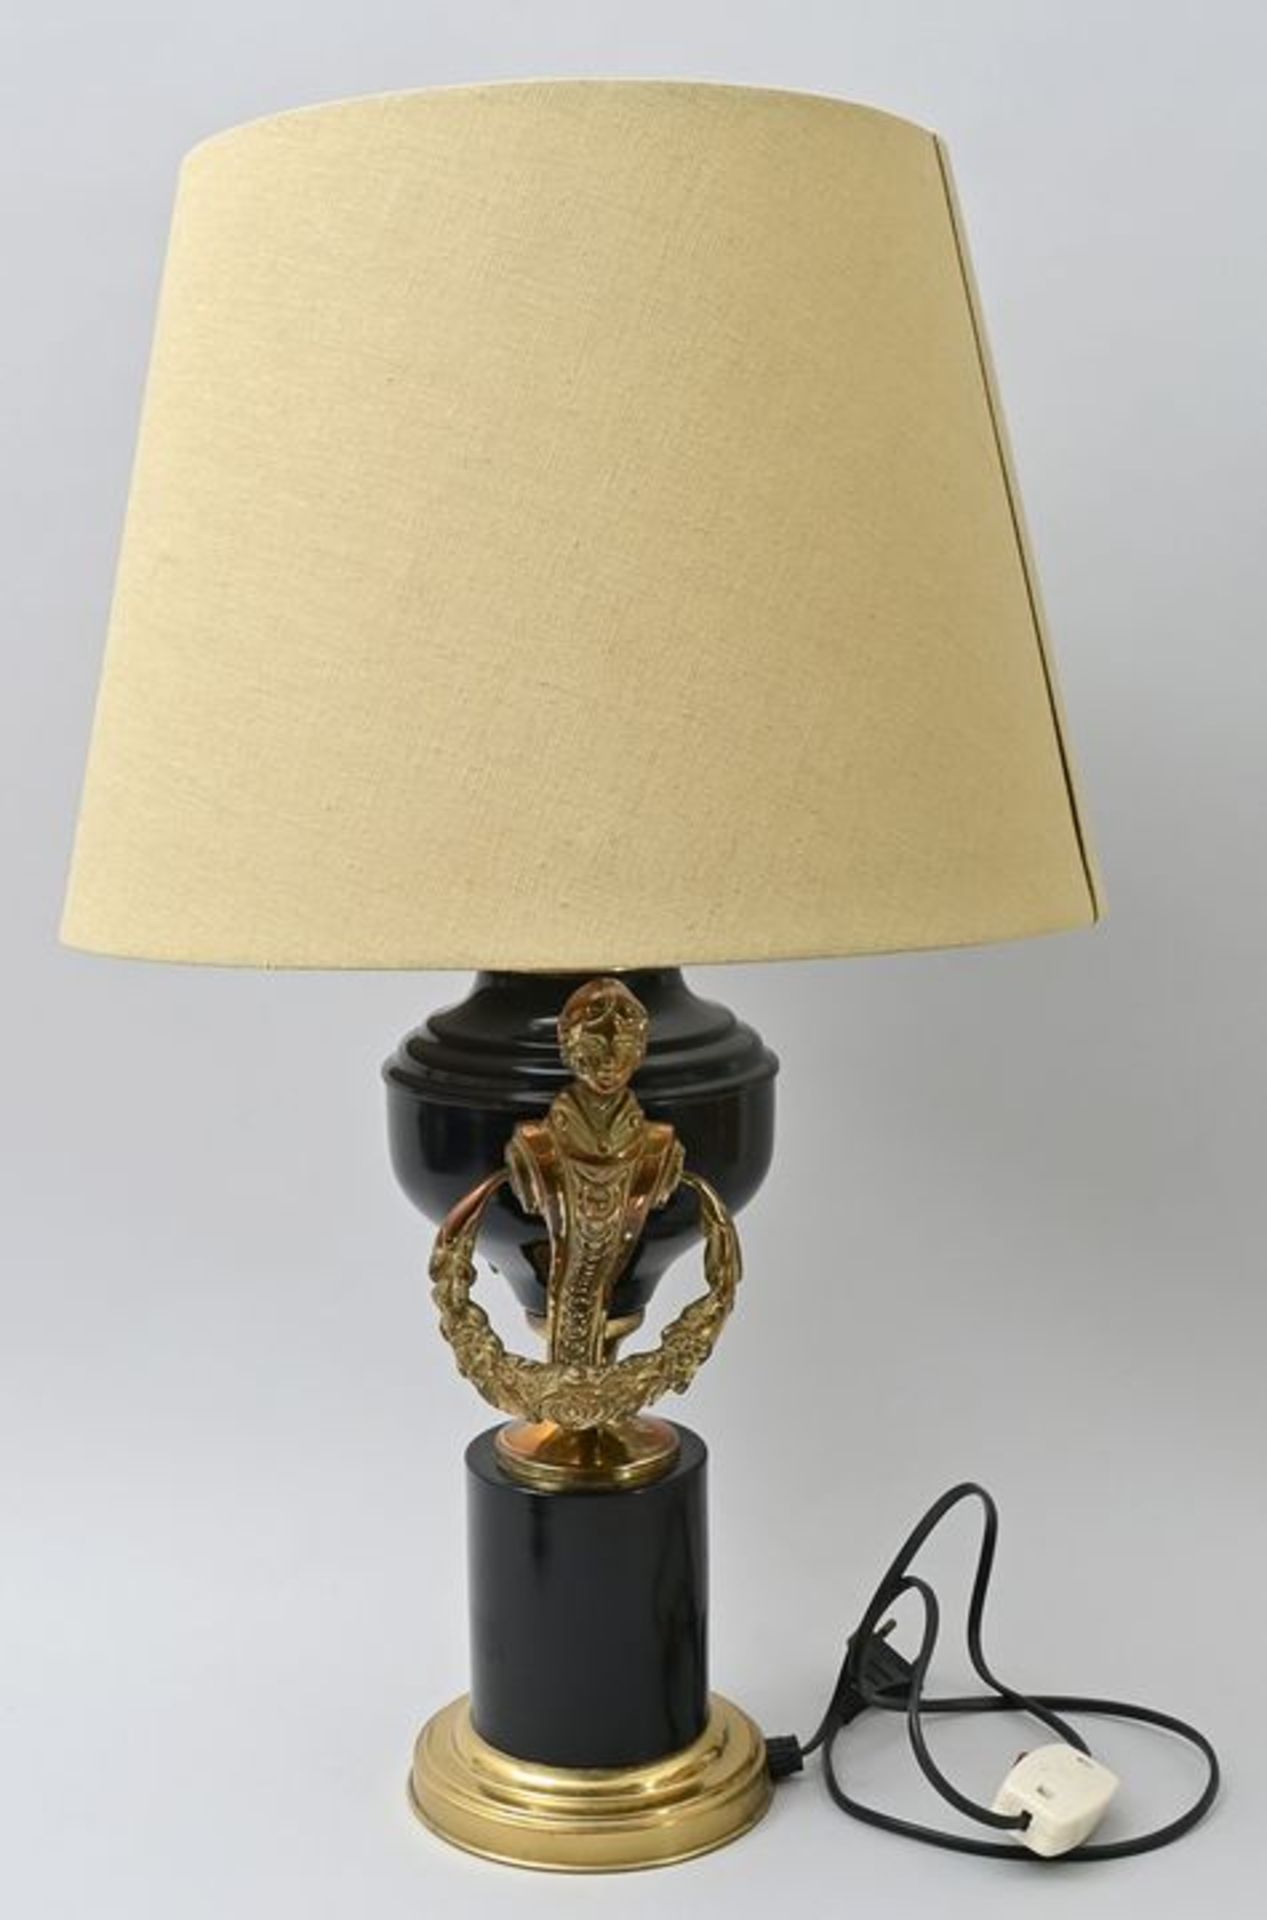 Tischlampe/ table lamp - Image 2 of 3